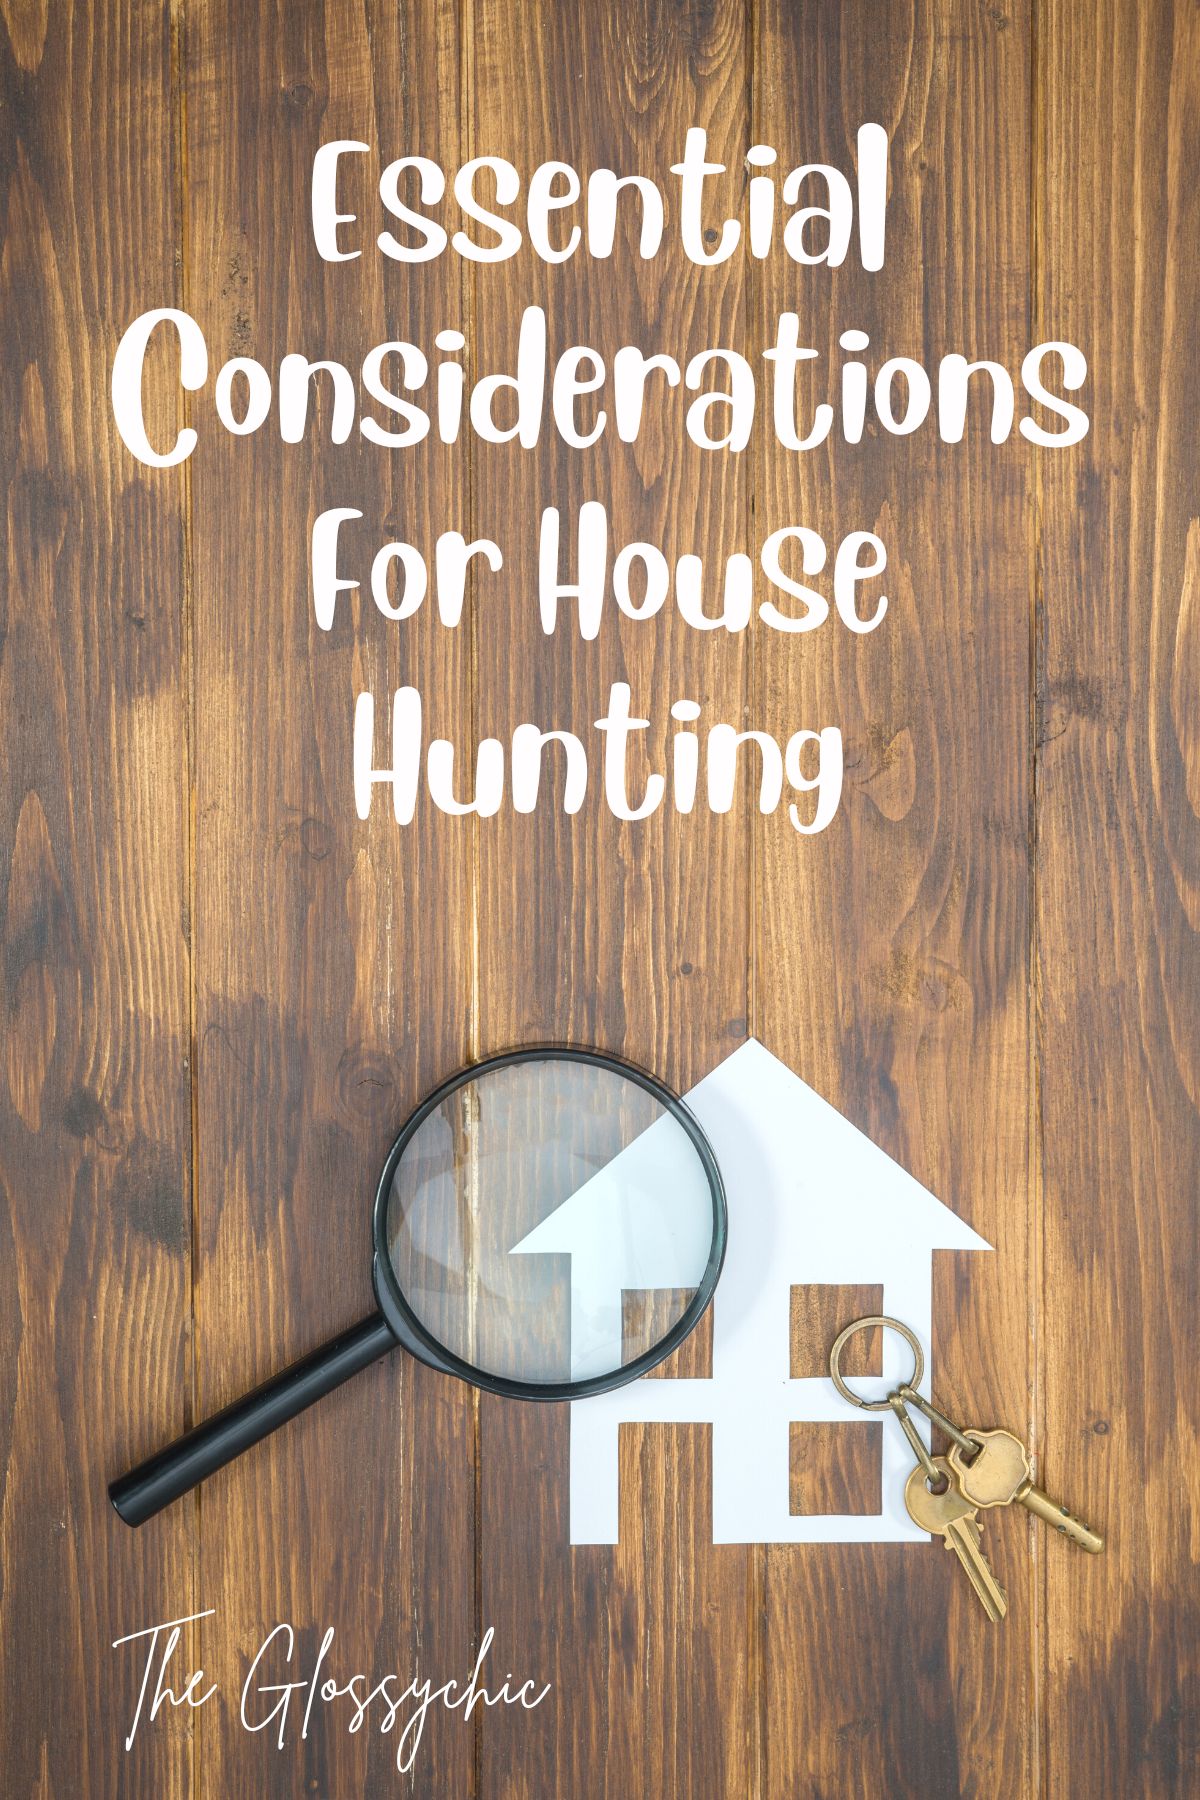 4 things to look out for when house hunting